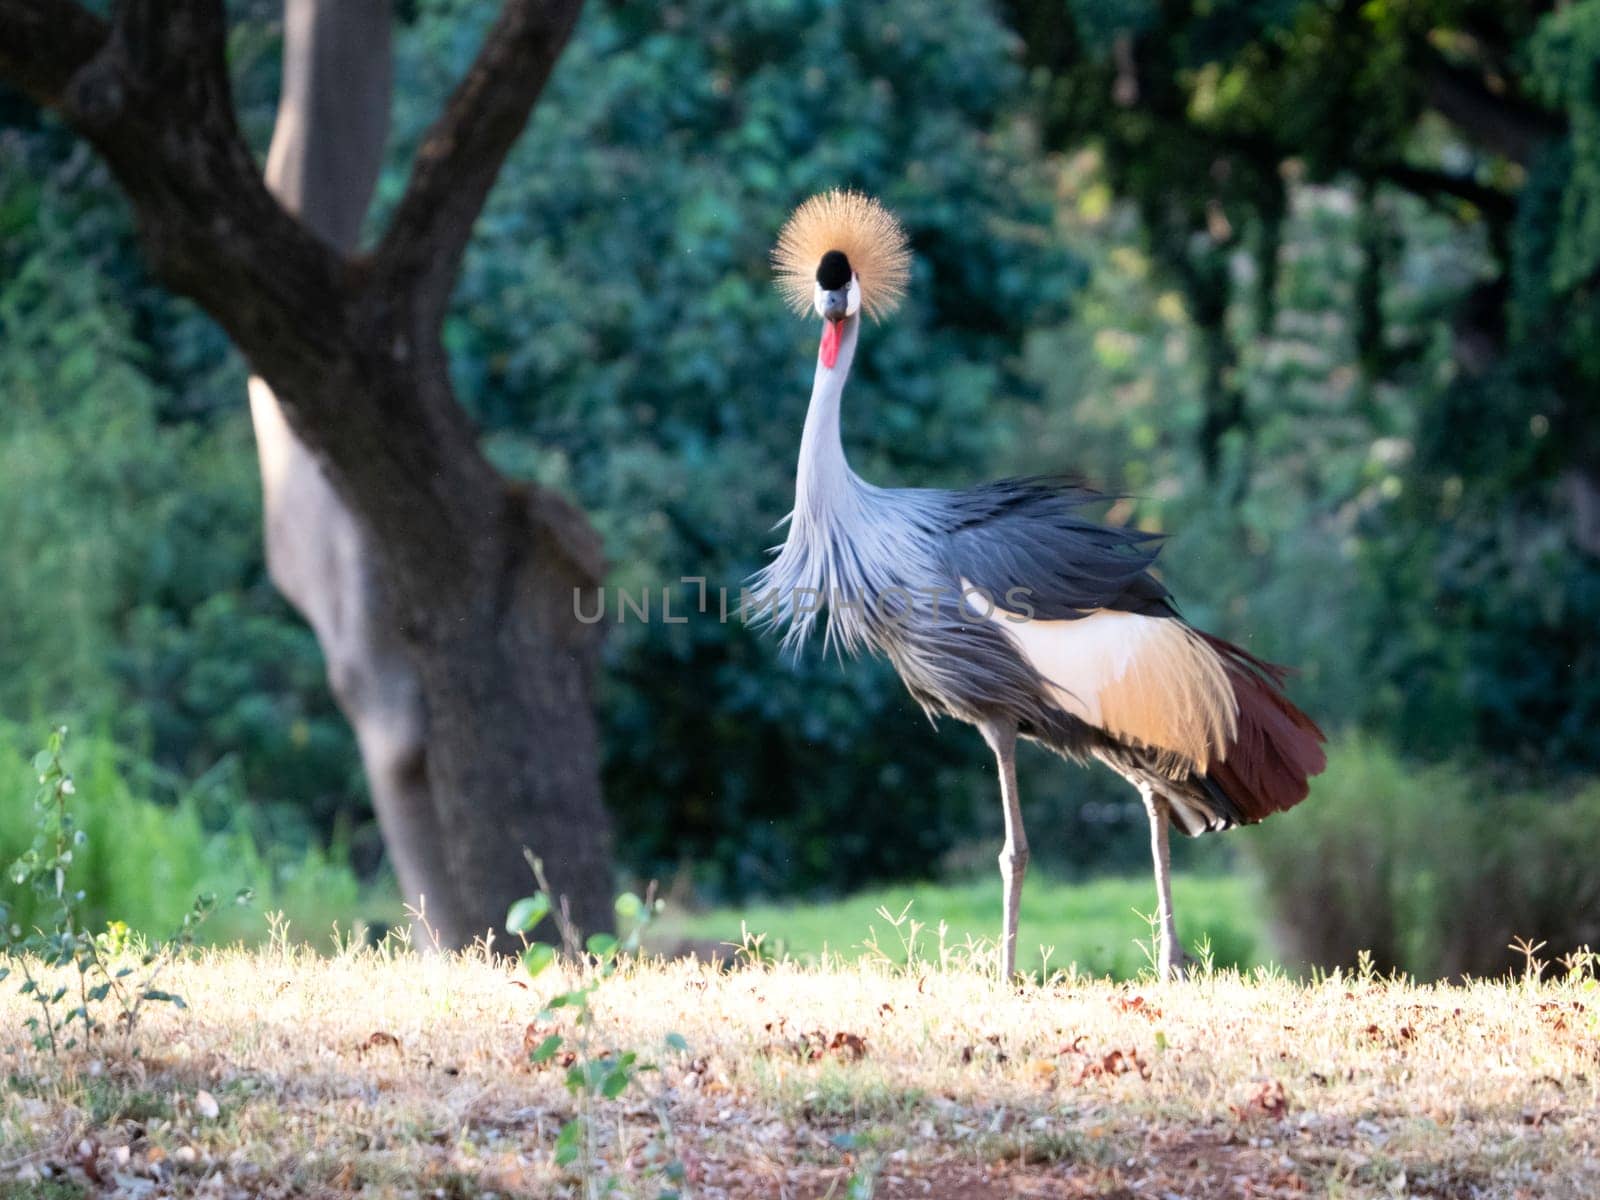 Grey Crowned Crane at the Honolulu Zoo by EricGBVD